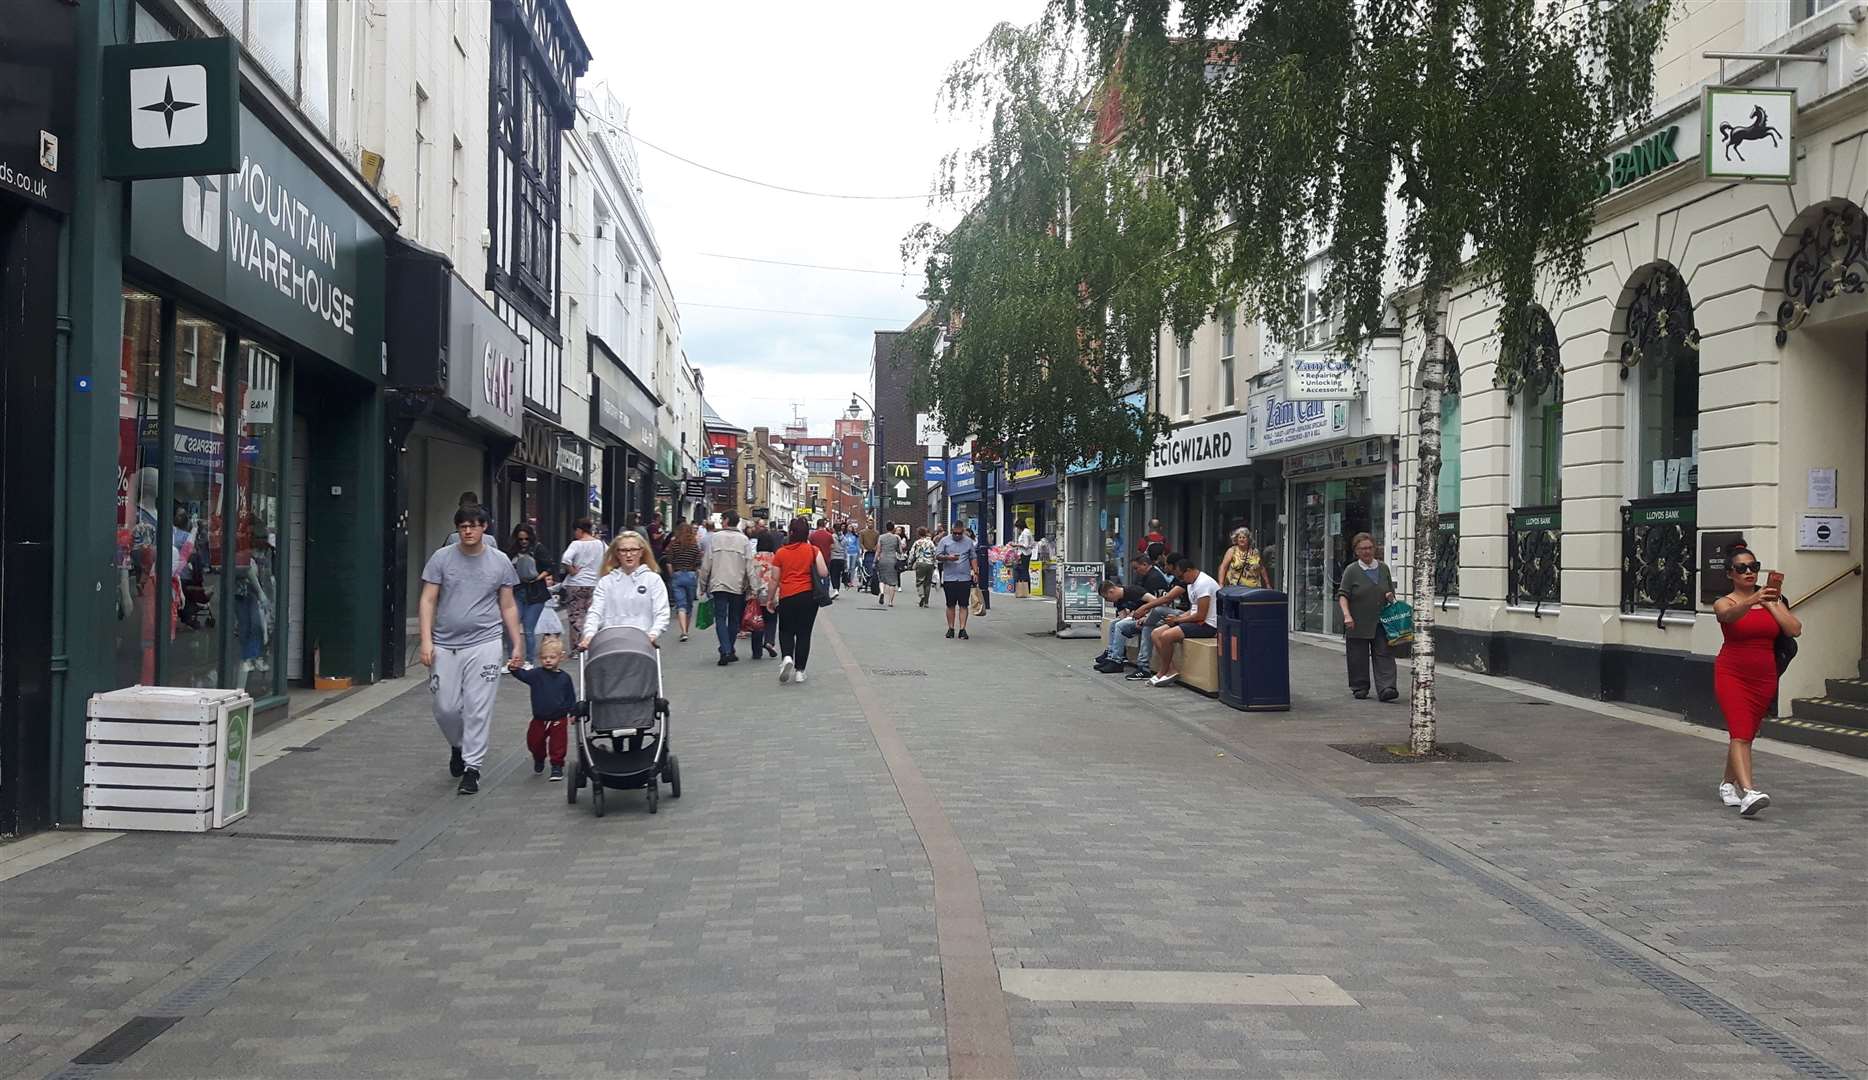 Maidstone has attracted plenty of shoppers today